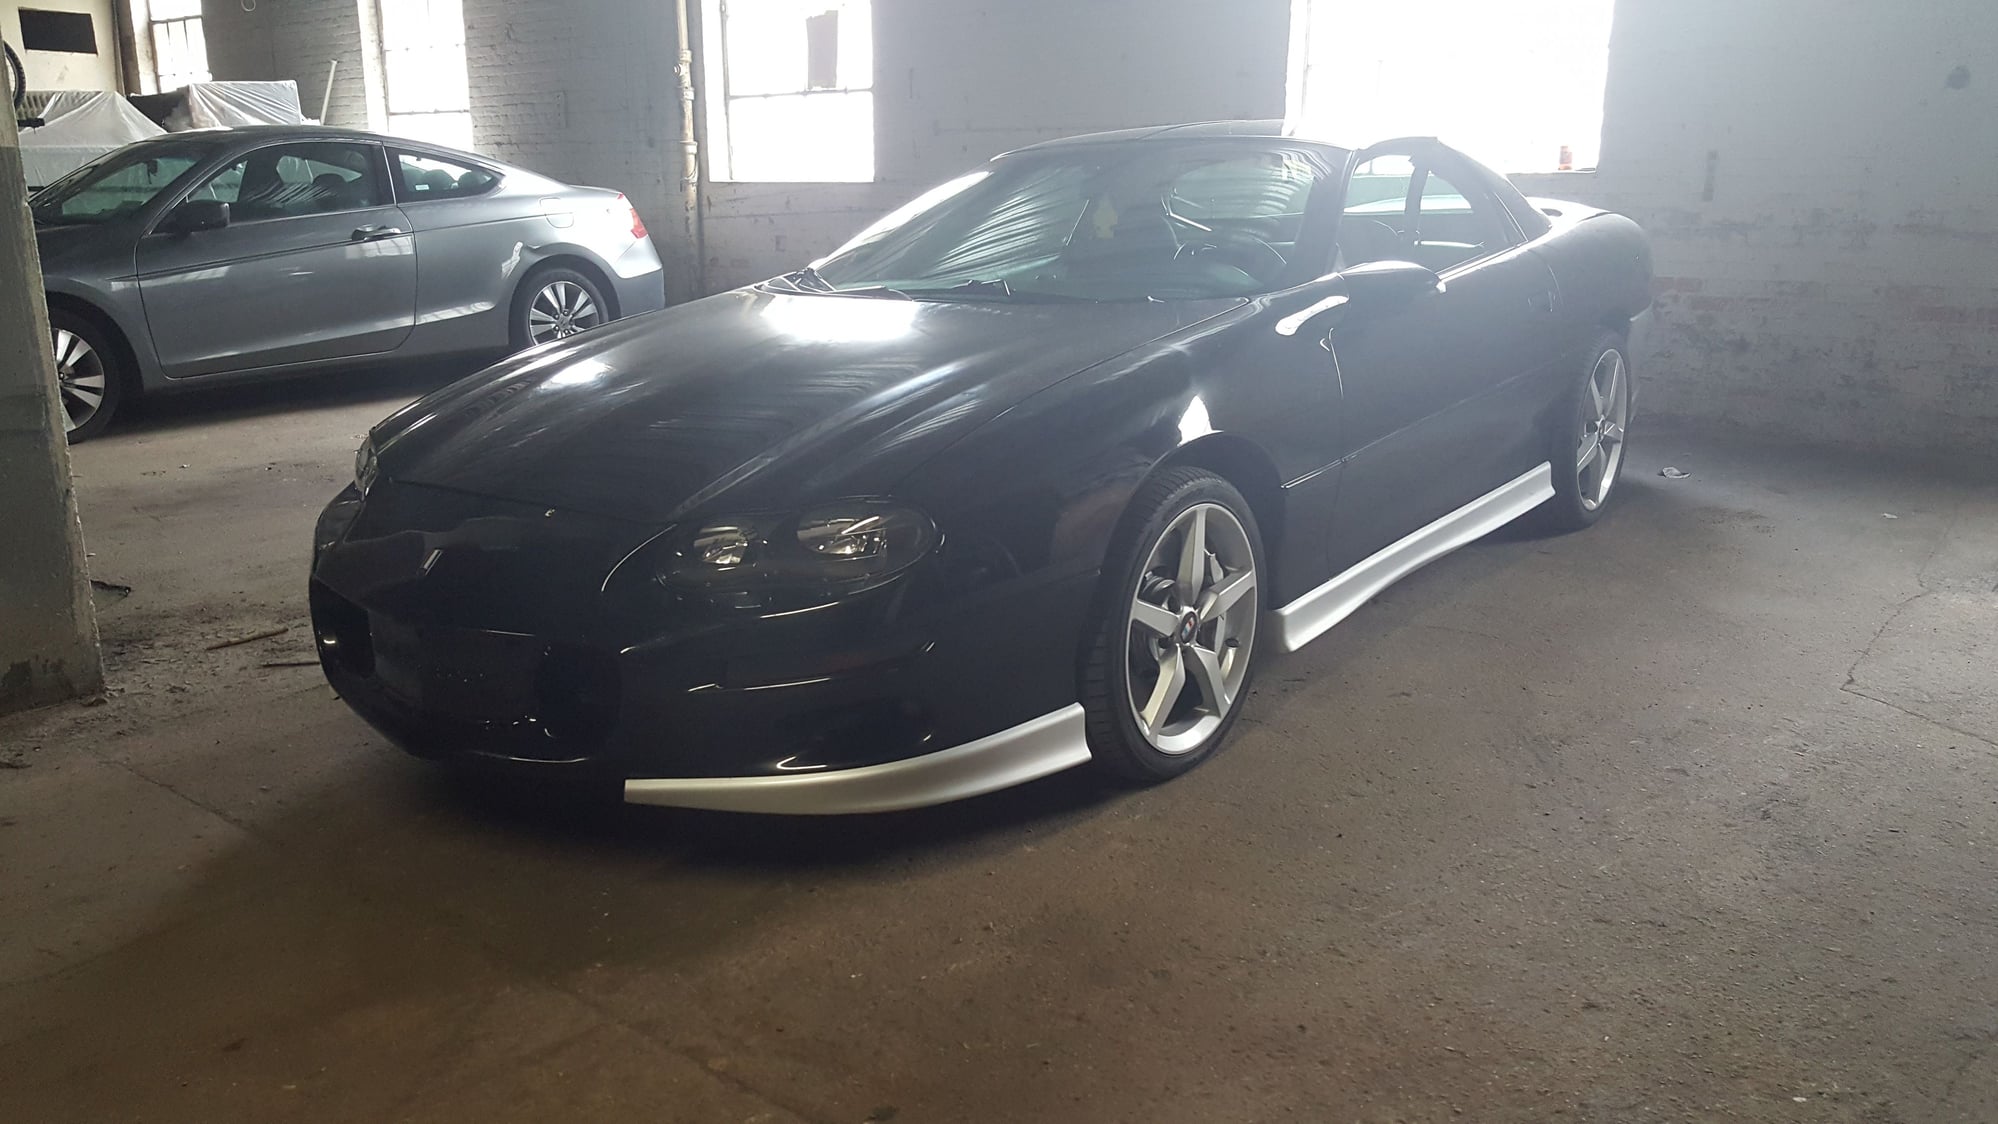 1998 Chevrolet Camaro - 1998 Z28 with Fitech 600hp and many new parts take a look - Used - VIN 2G1FP22G8W21219 - 260,000 Miles - 8 cyl - 2WD - Manual - Coupe - Black - Yonkers, NY 10701, United States